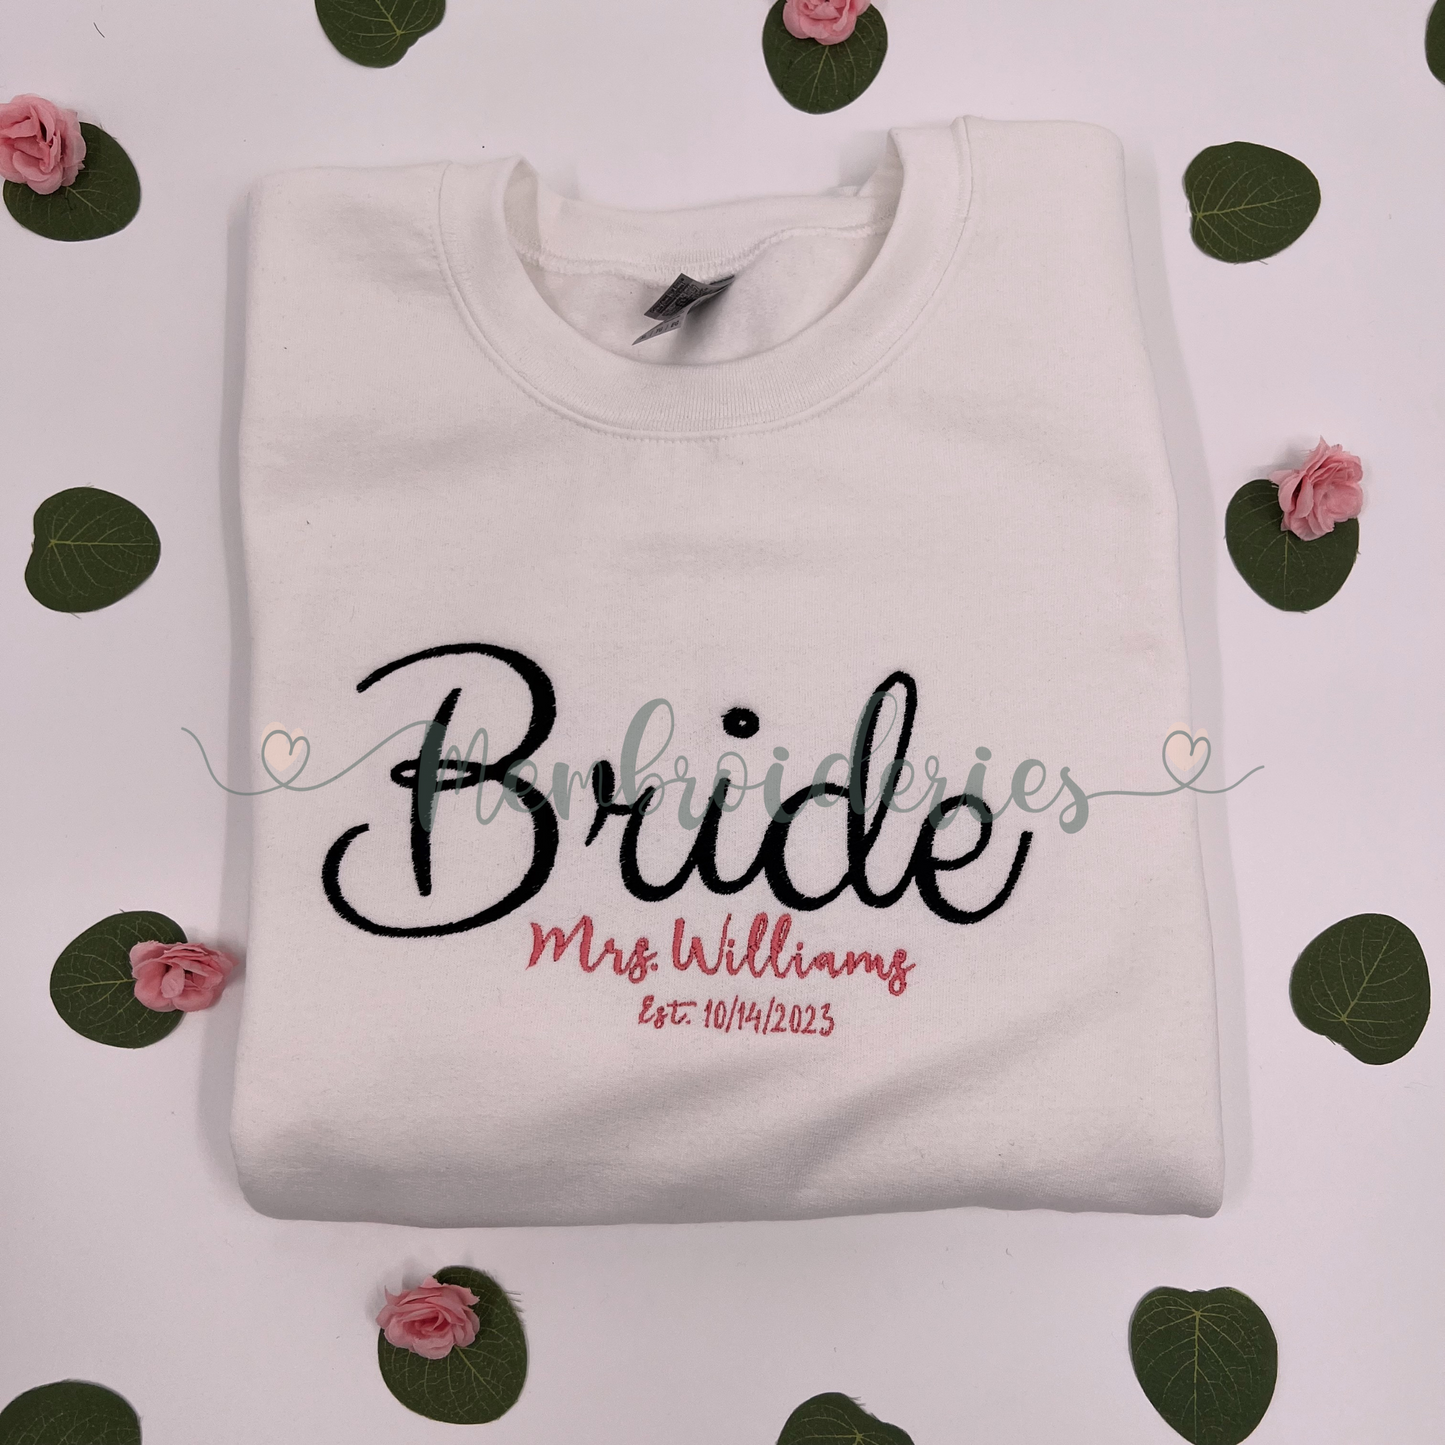 Personalized "Bride" Embroidered Sweatshirt